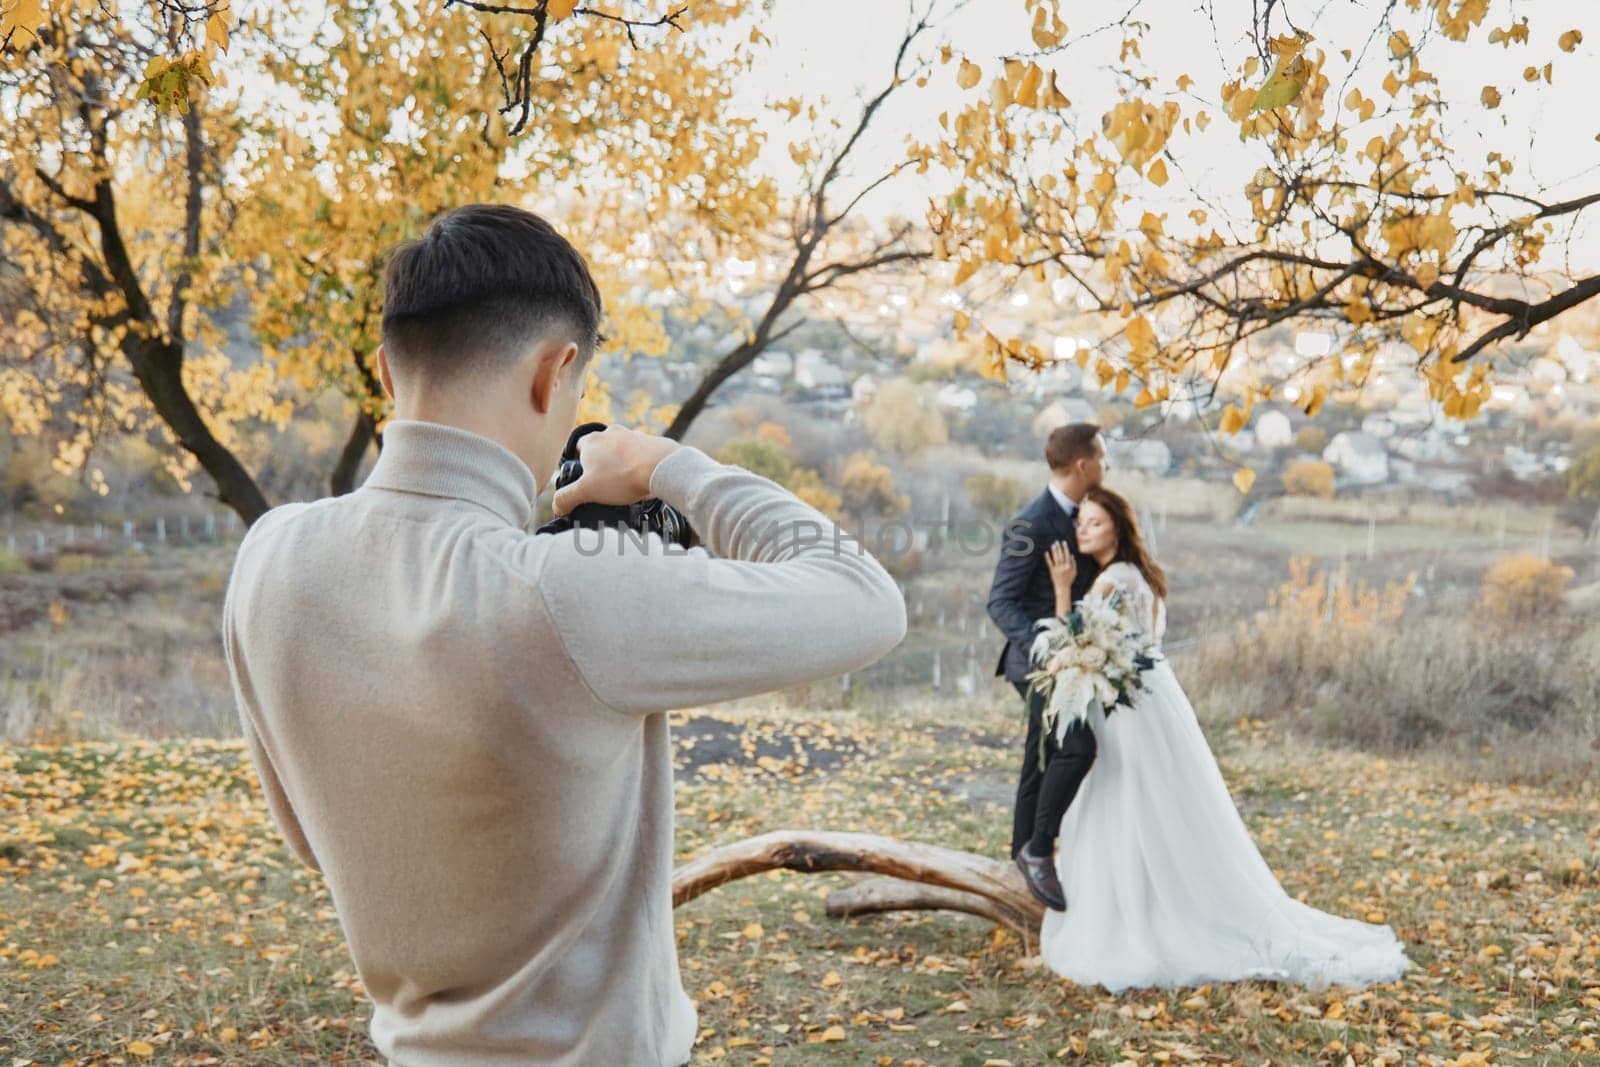 Professional wedding photographer taking pictures of the bride and groom in nature in autumn